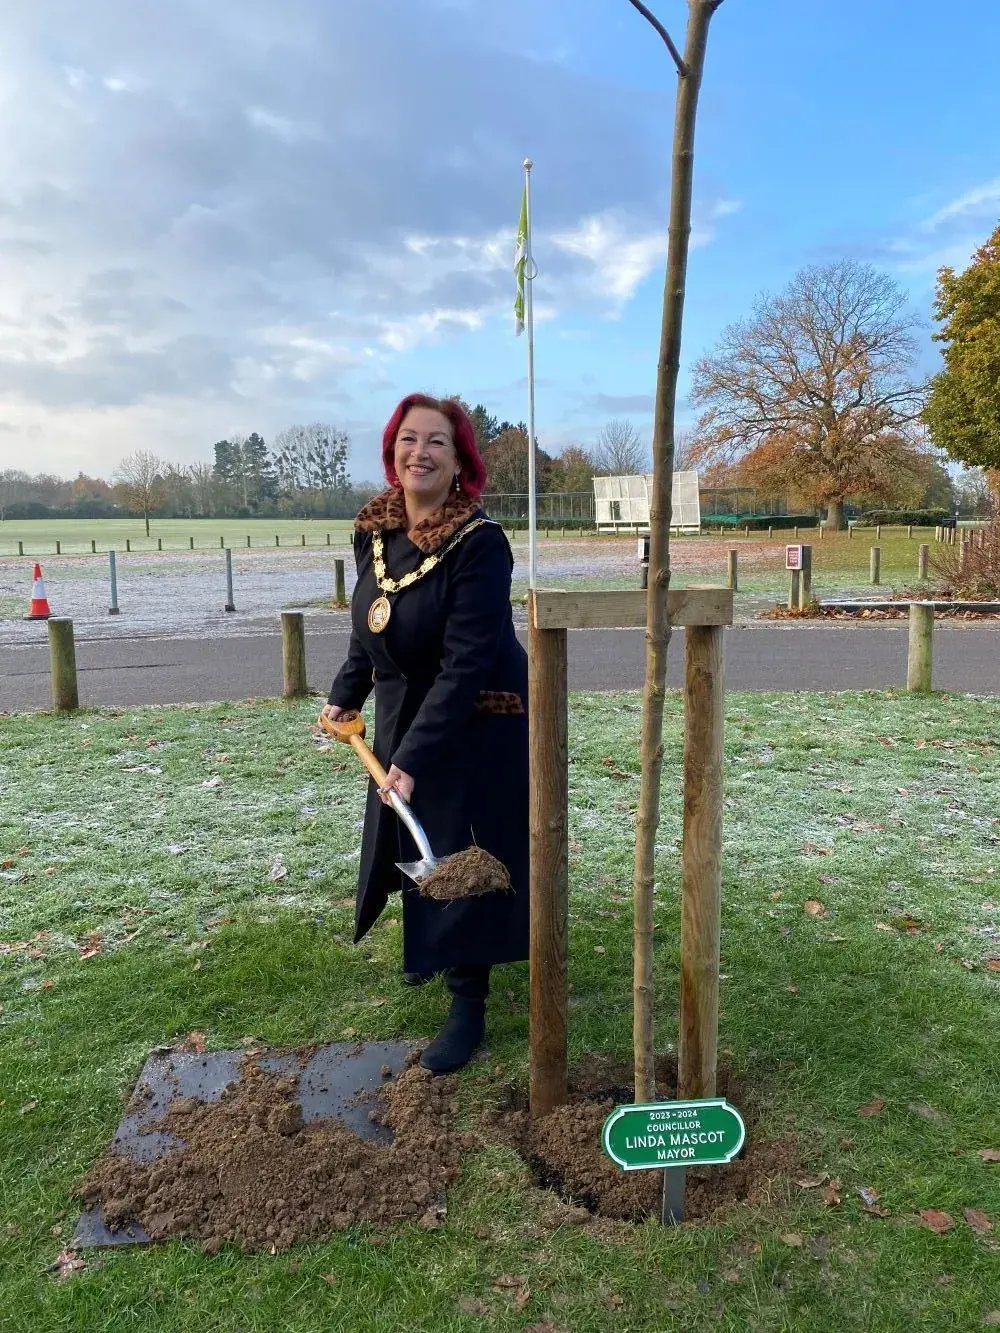 Cllr Mascot with spade planting her maple tree